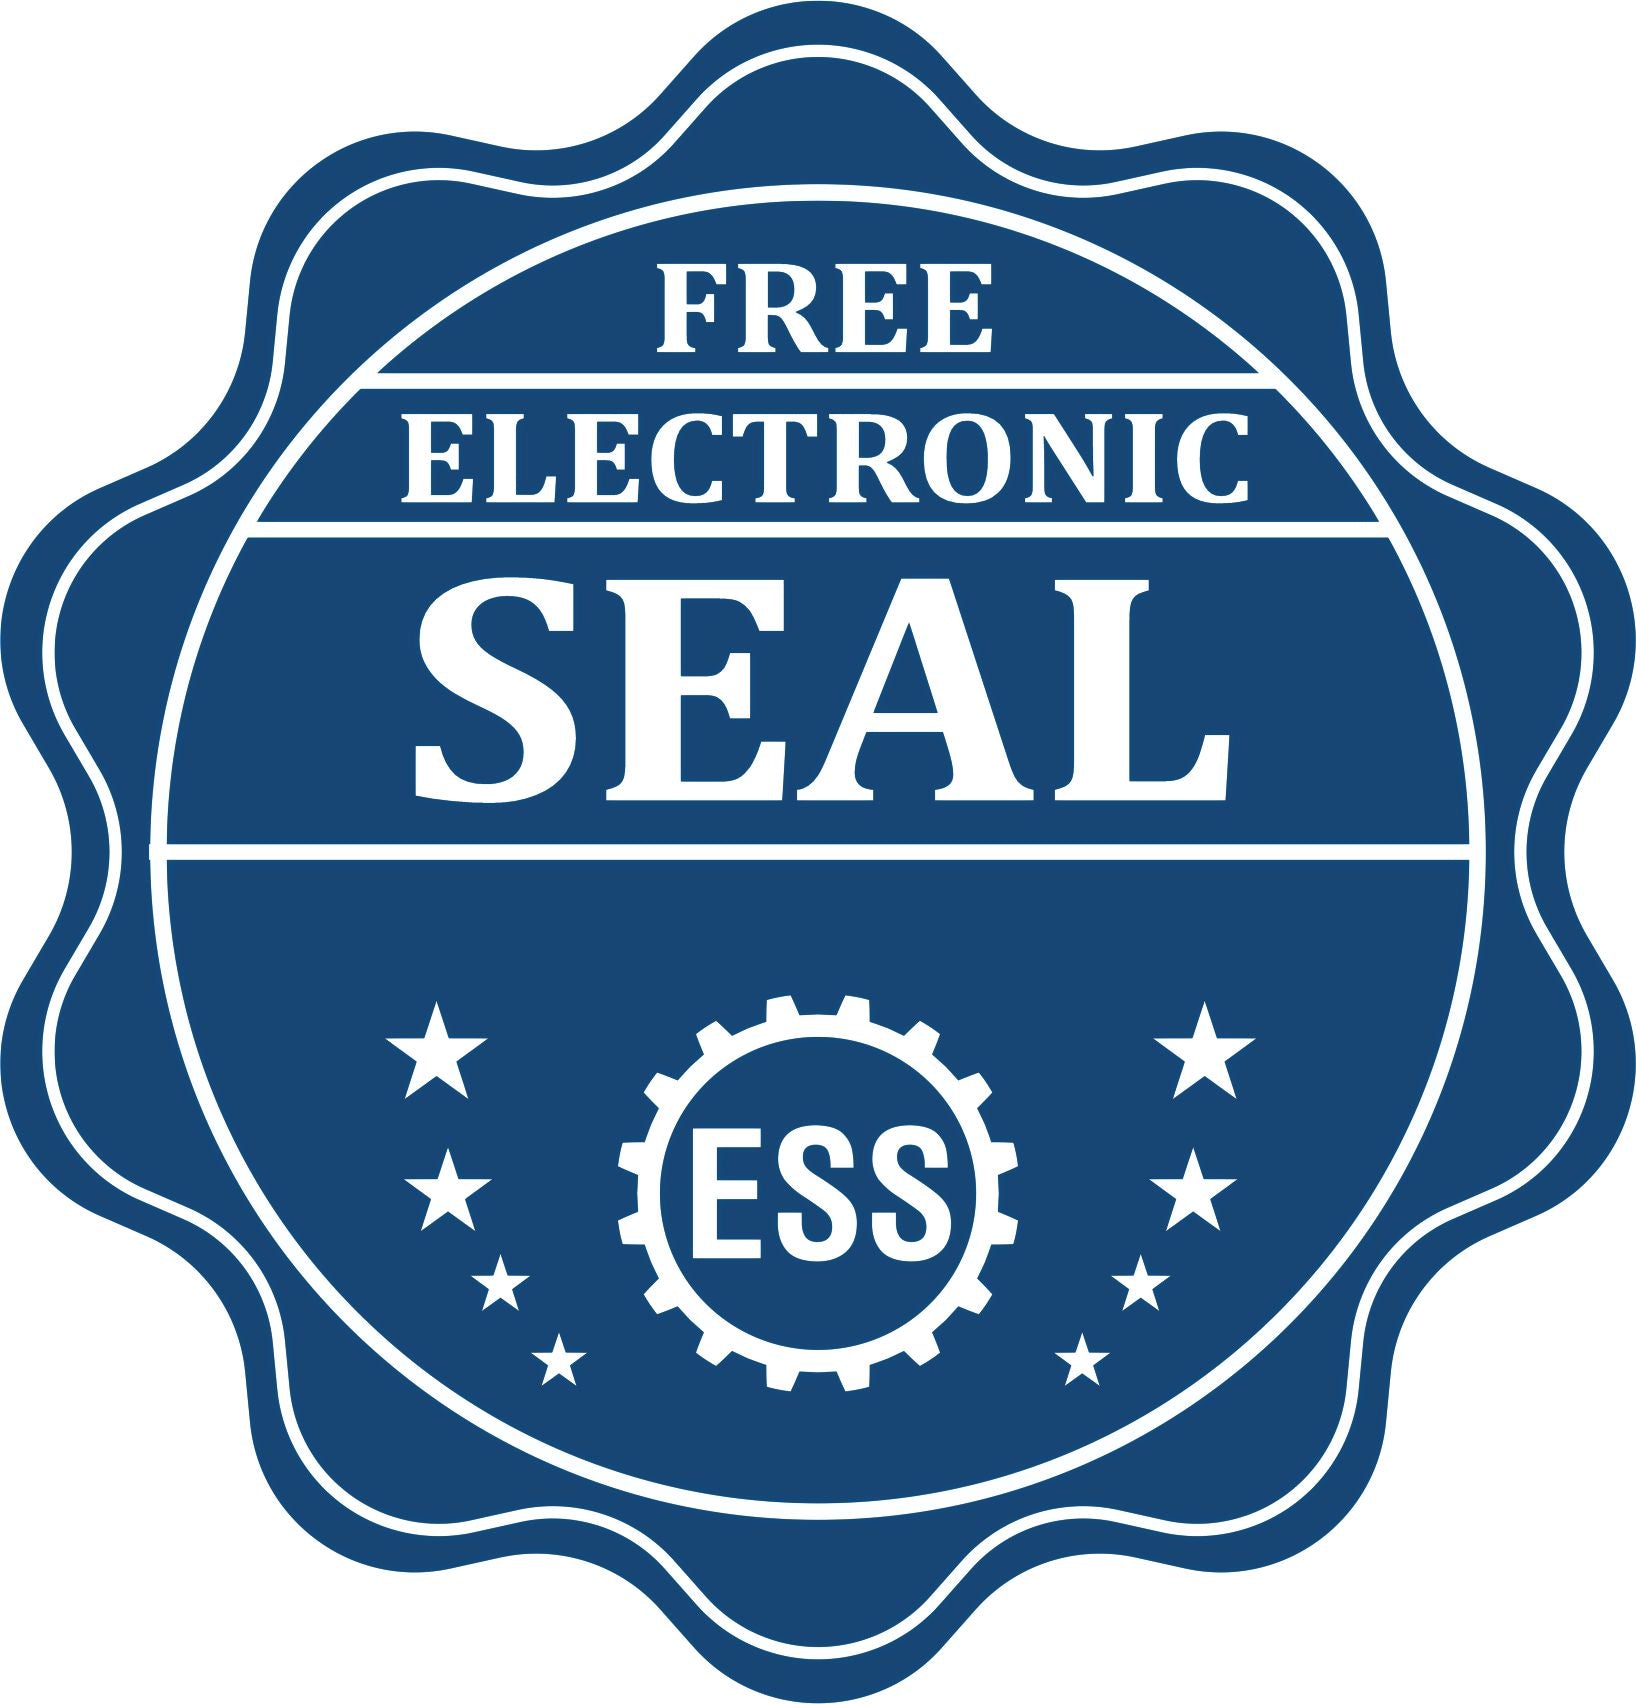 A badge showing a free electronic seal for the Heavy Duty Cast Iron Florida Engineer Seal Embosser with stars and the ESS gear on the emblem.